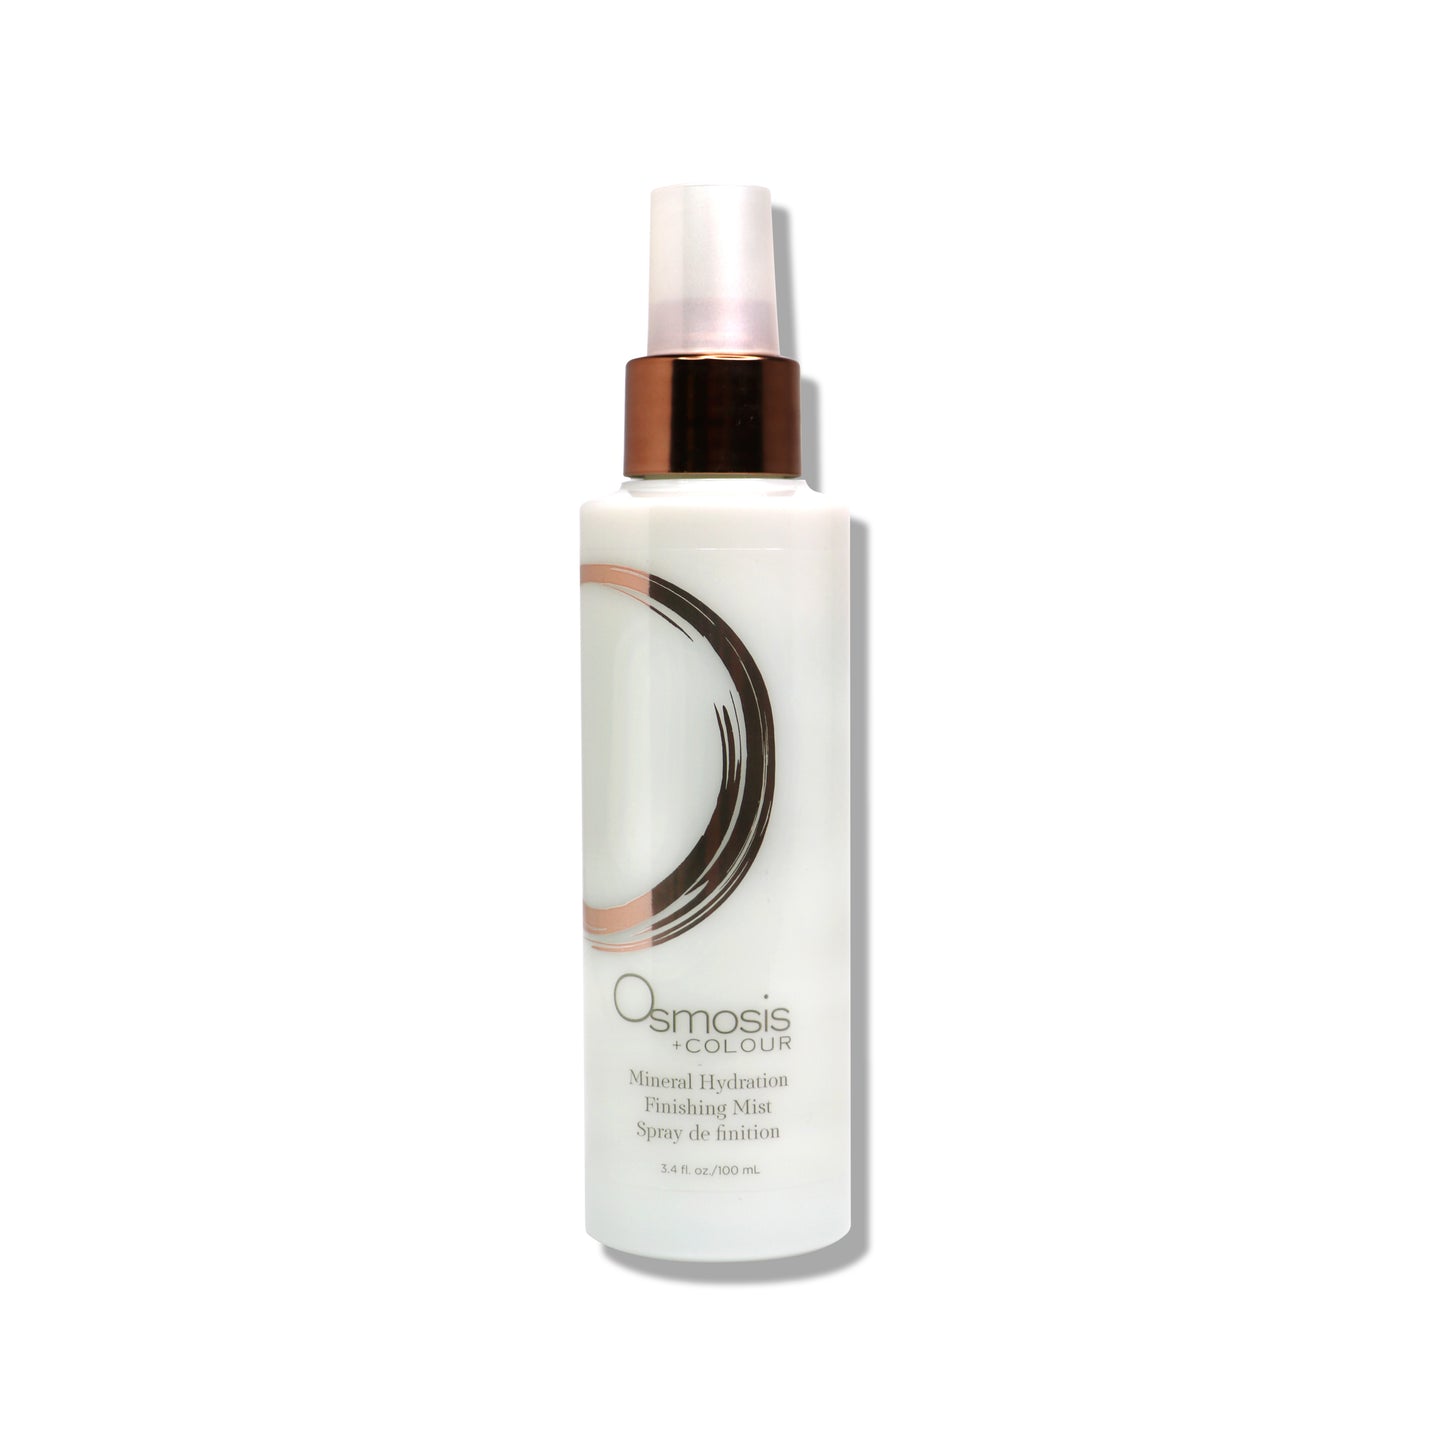 Osmosis mineral hydration mist